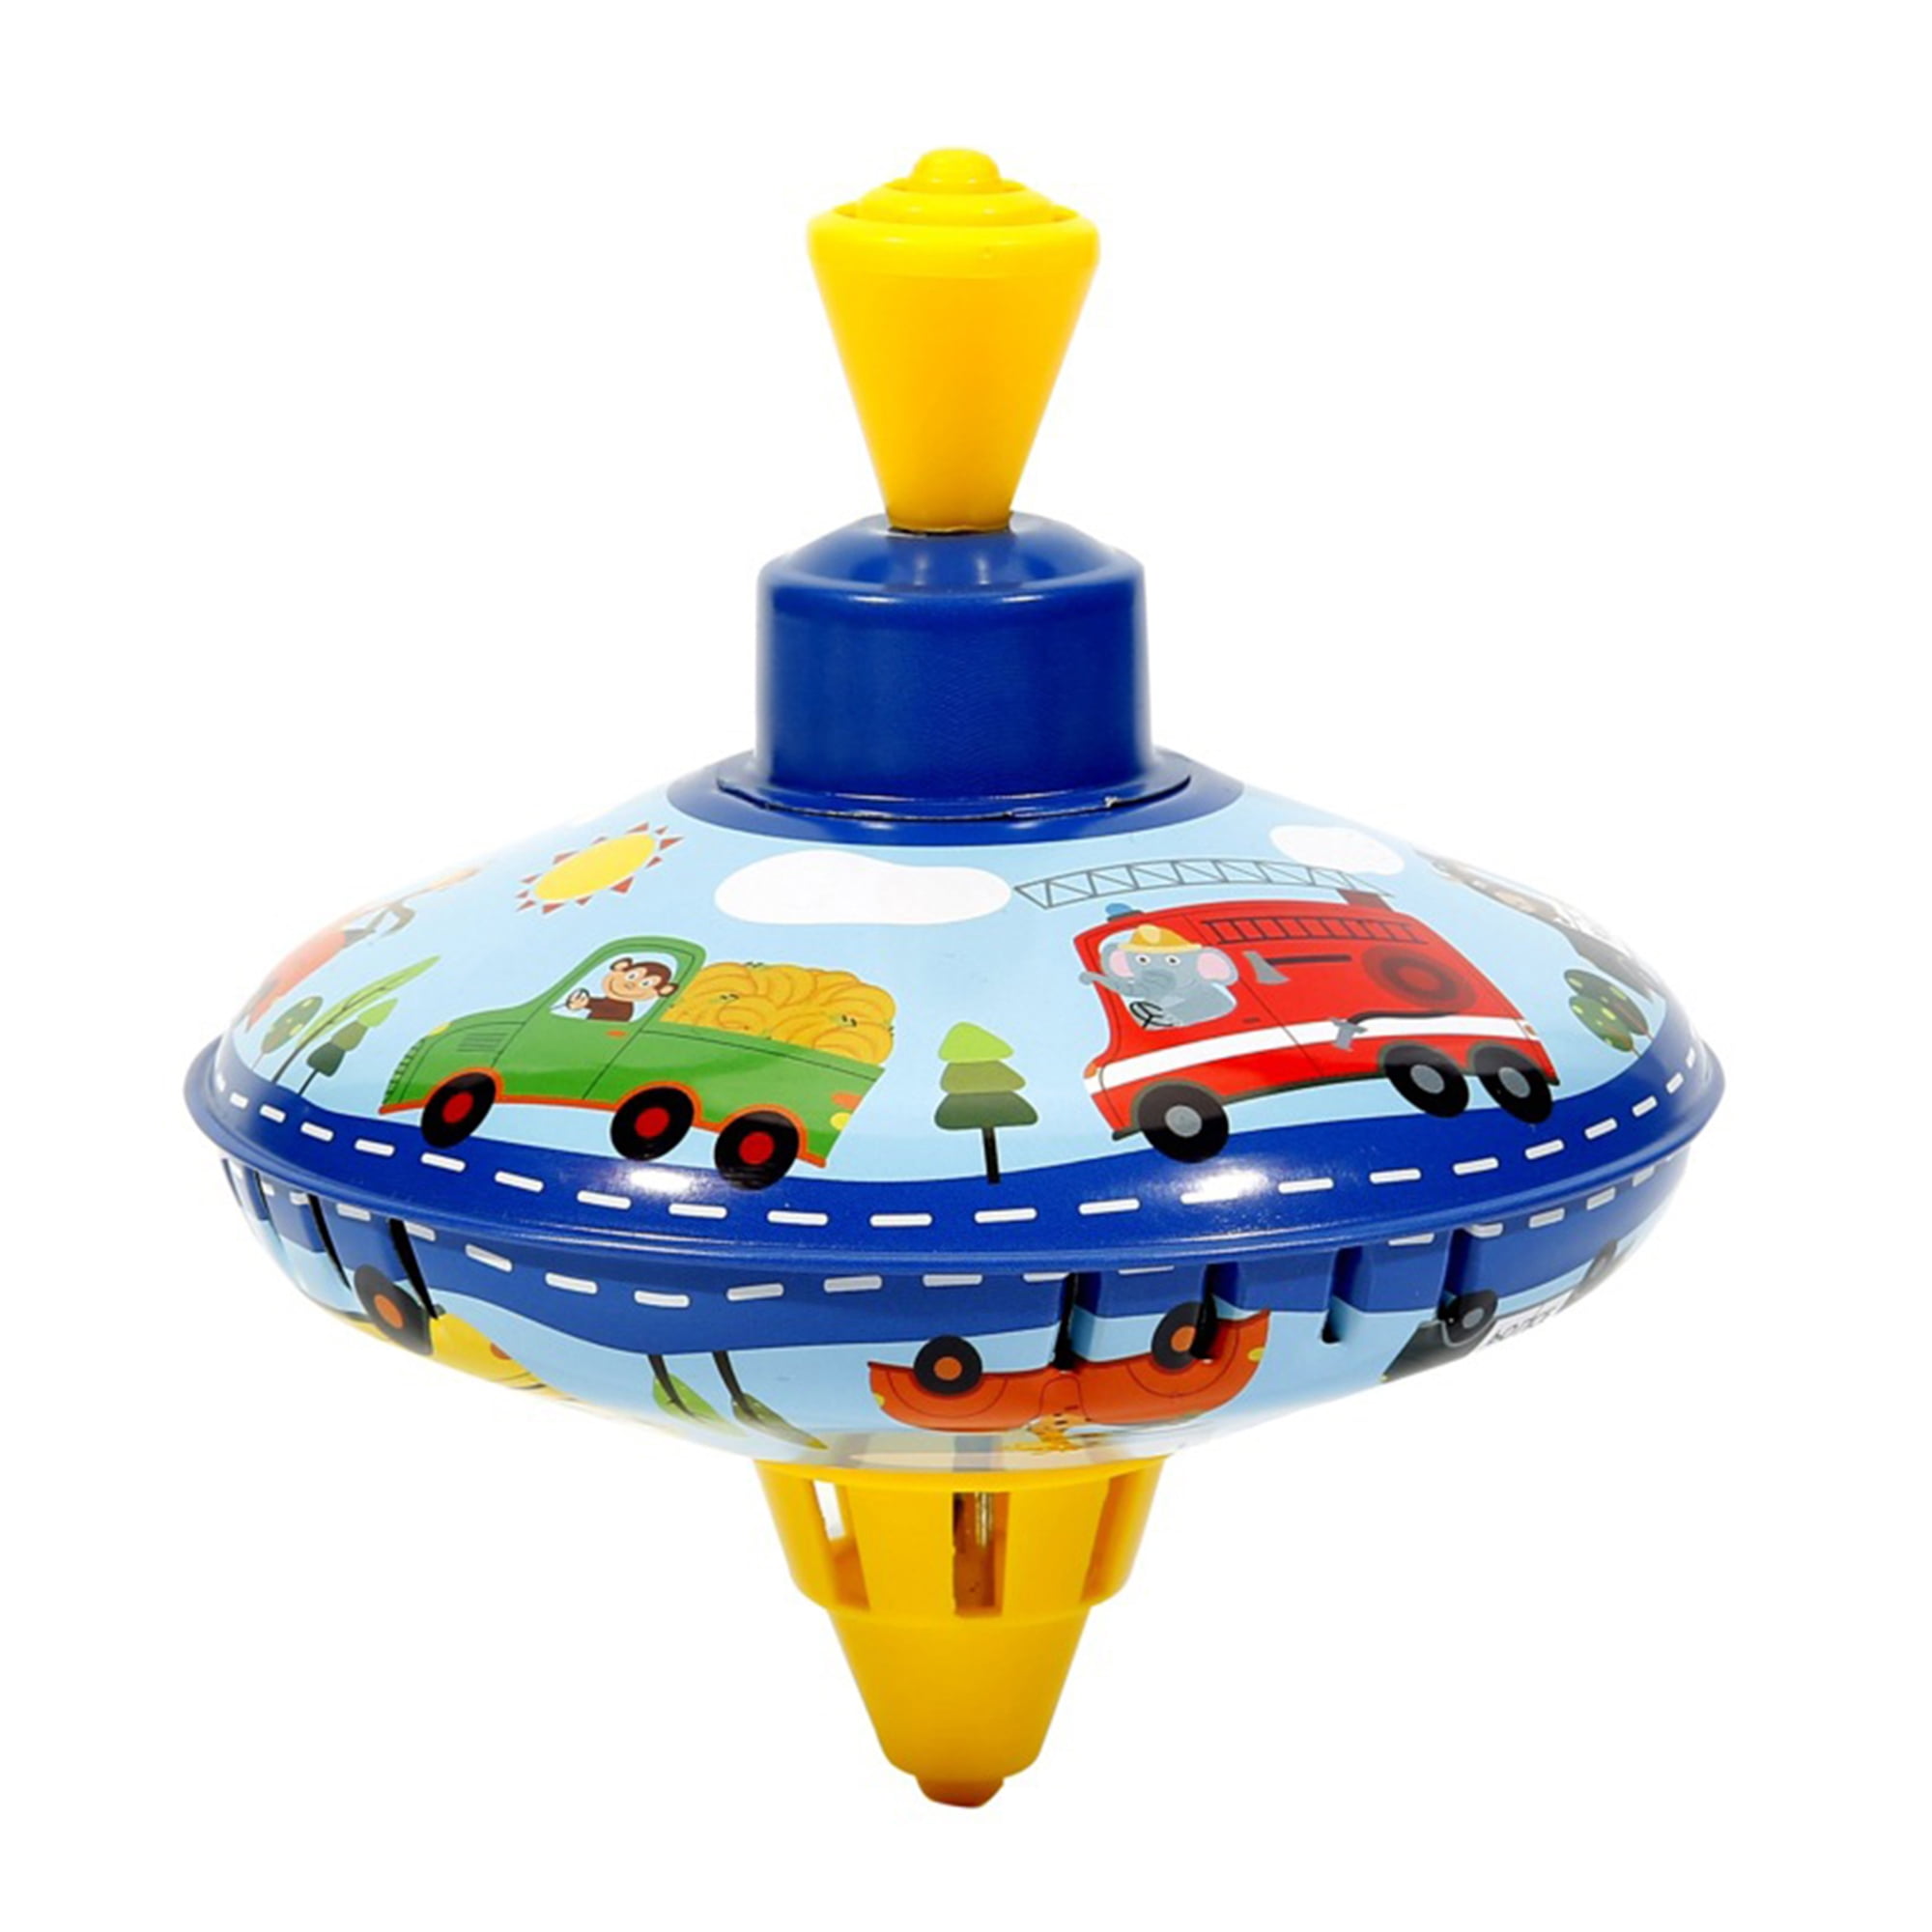 1PC Spinning Top Toy Wooden Cartoon Princess Peg-top Pull String Rotation Gyro 